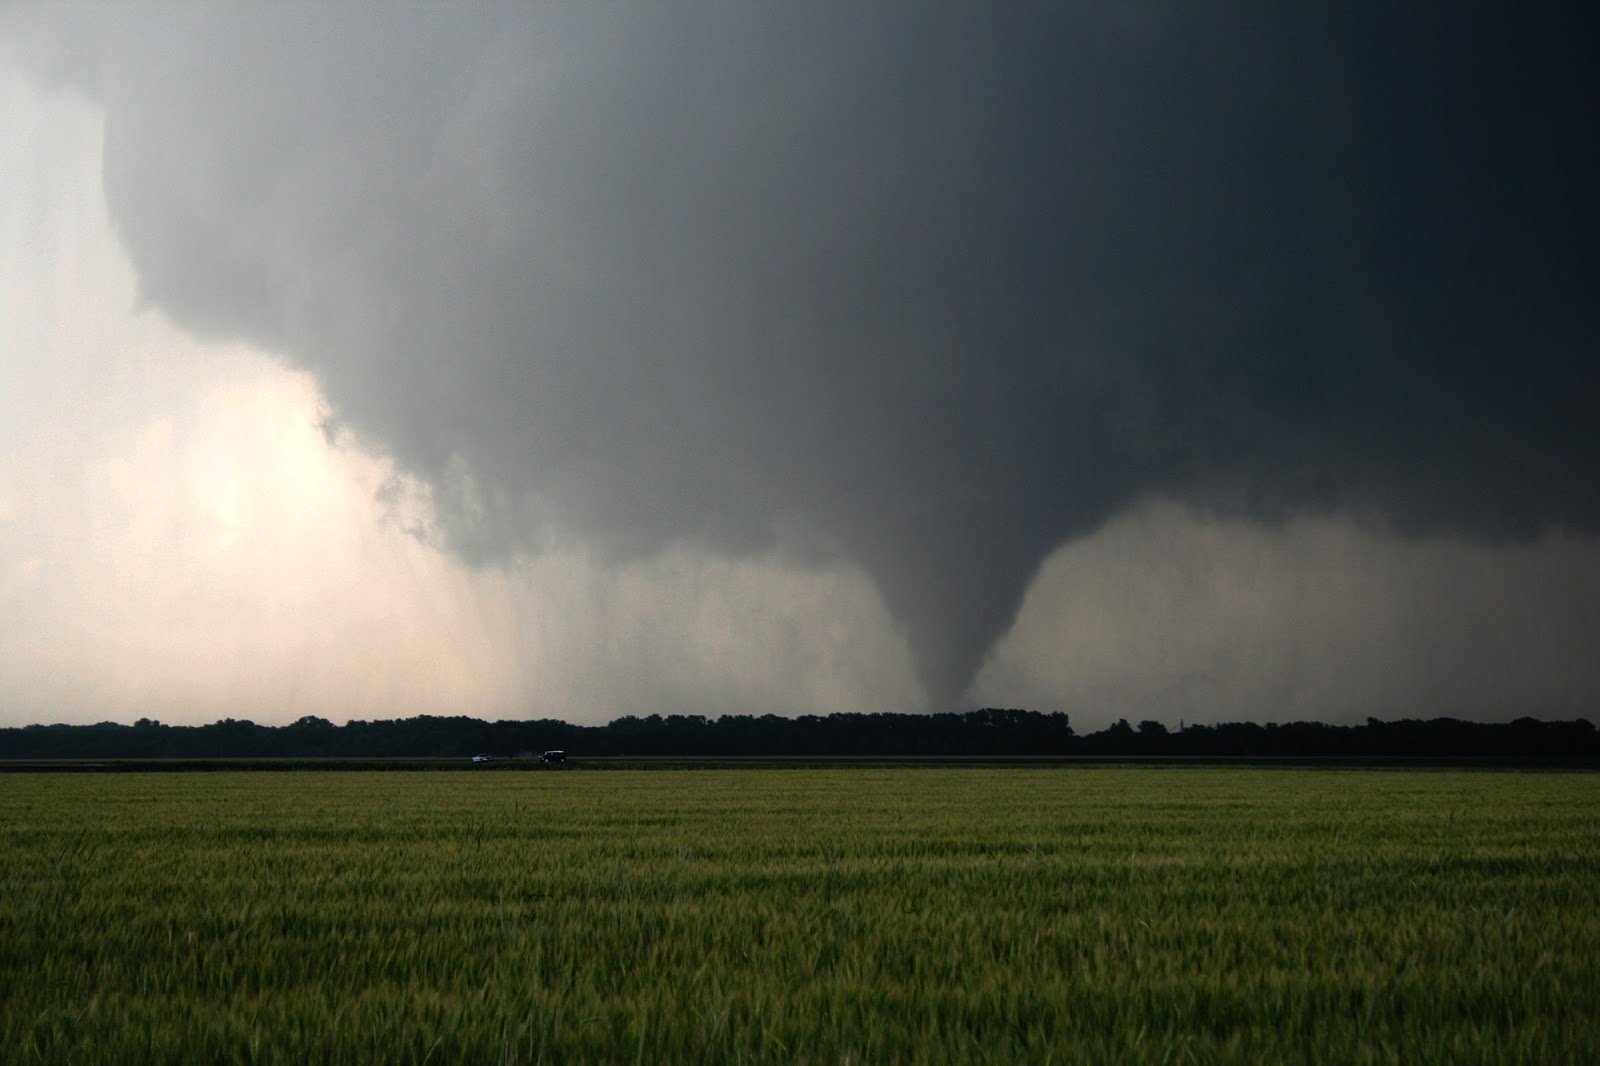 WeatherHolidays top three Storm Chases - Number 3: Chapman EF4